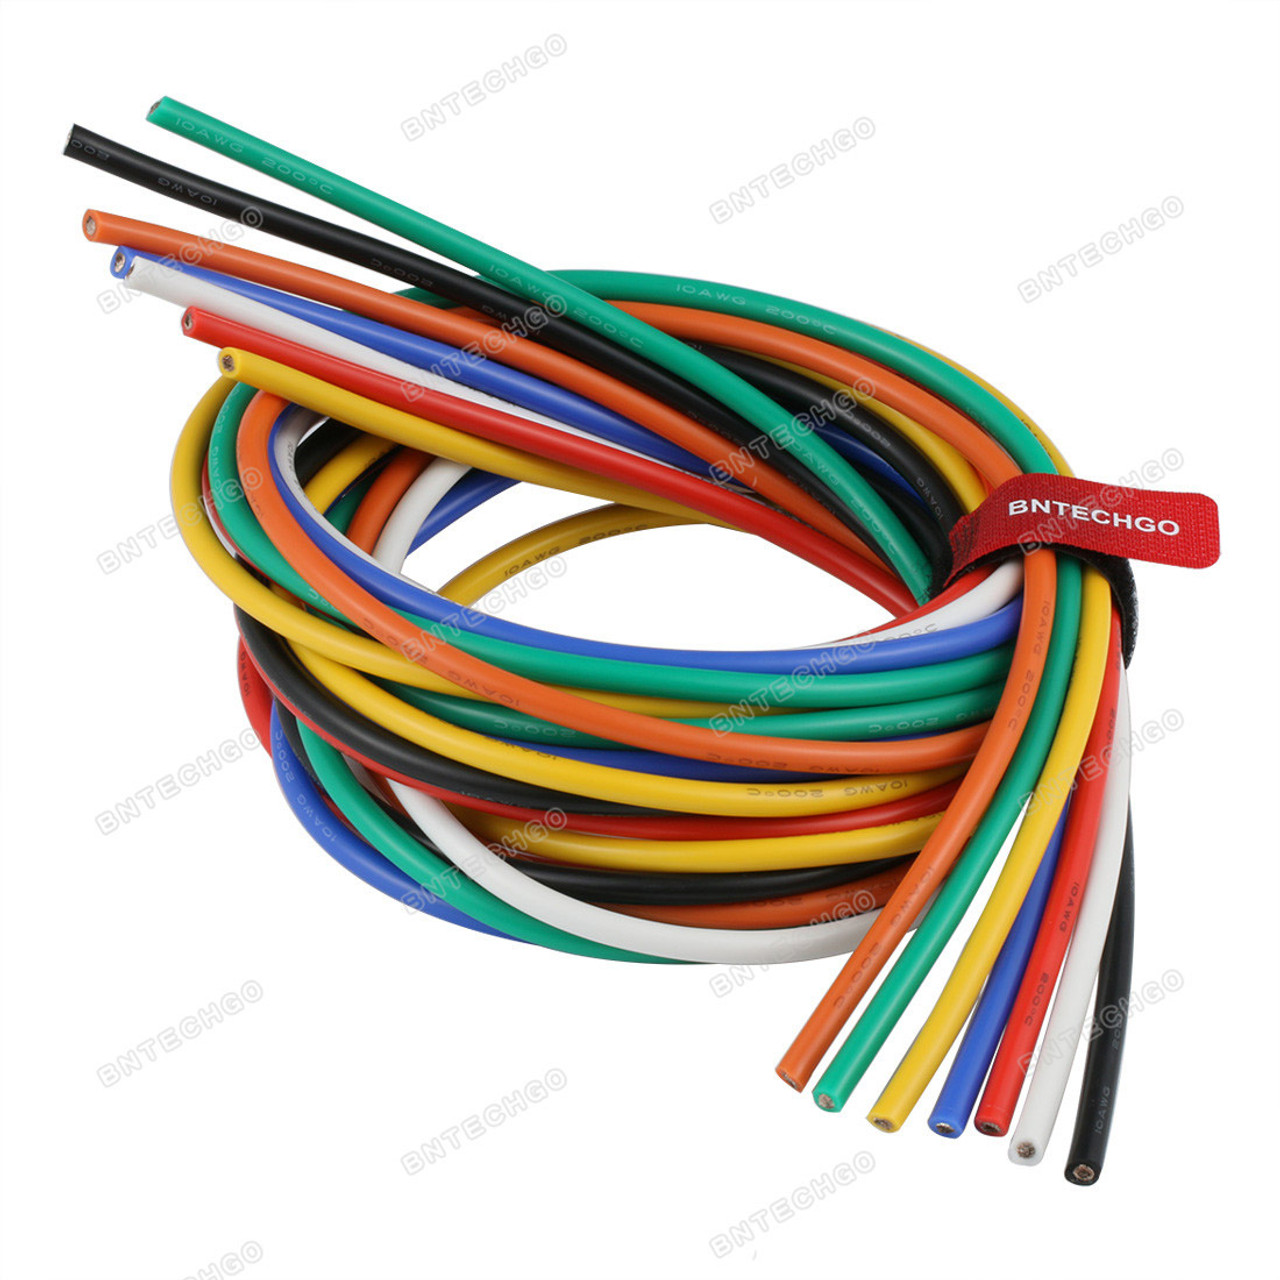 BNTECHGO 26 Gauge Silicone wire 10 ft red and 10 ft black Flexible 26 AWG  Stranded Tinned Copper Wire